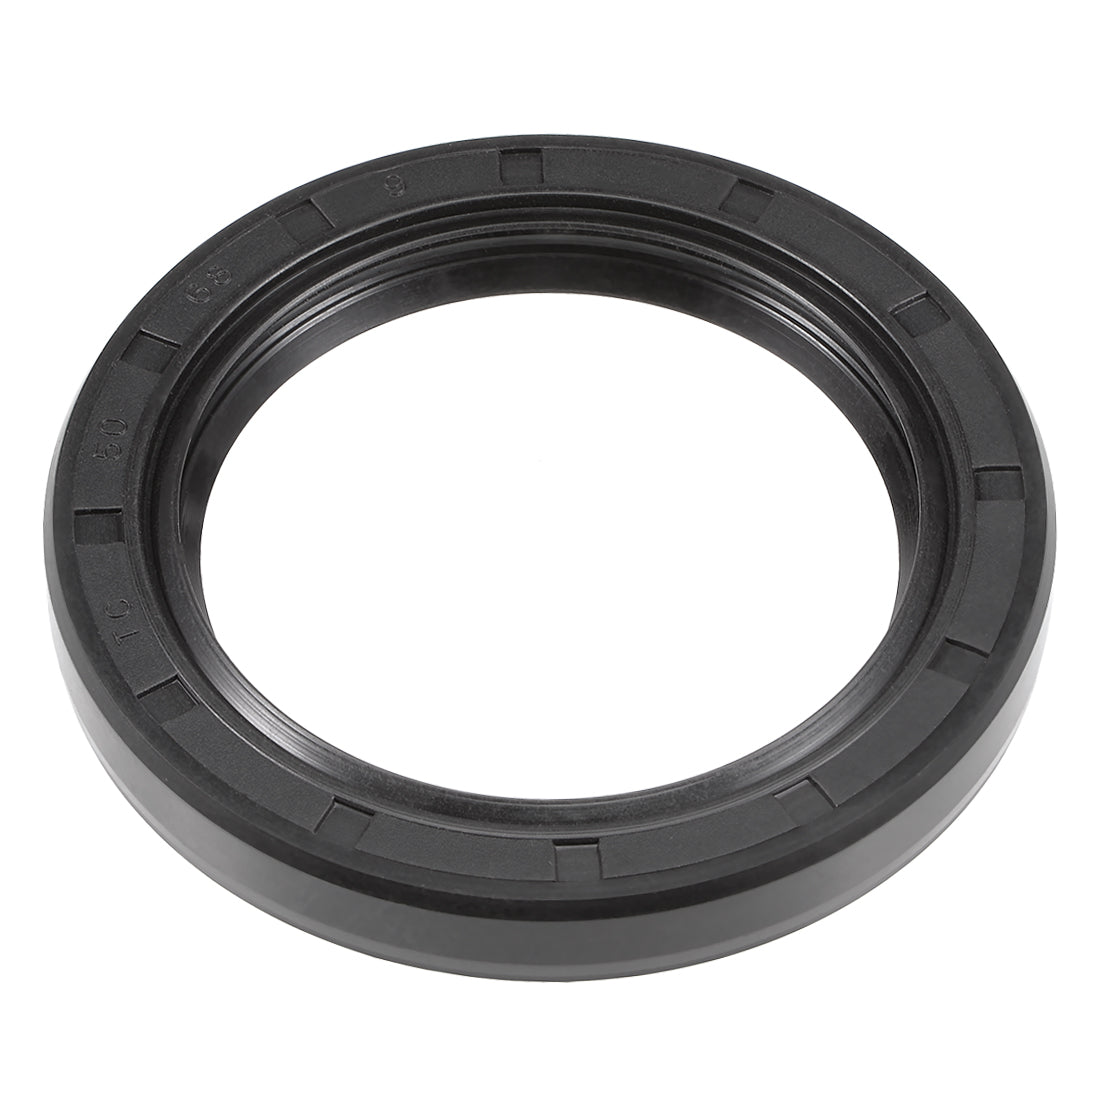 uxcell Uxcell Oil Seal, TC 50mm x 68mm x 9mm, Nitrile Rubber Cover Double Lip